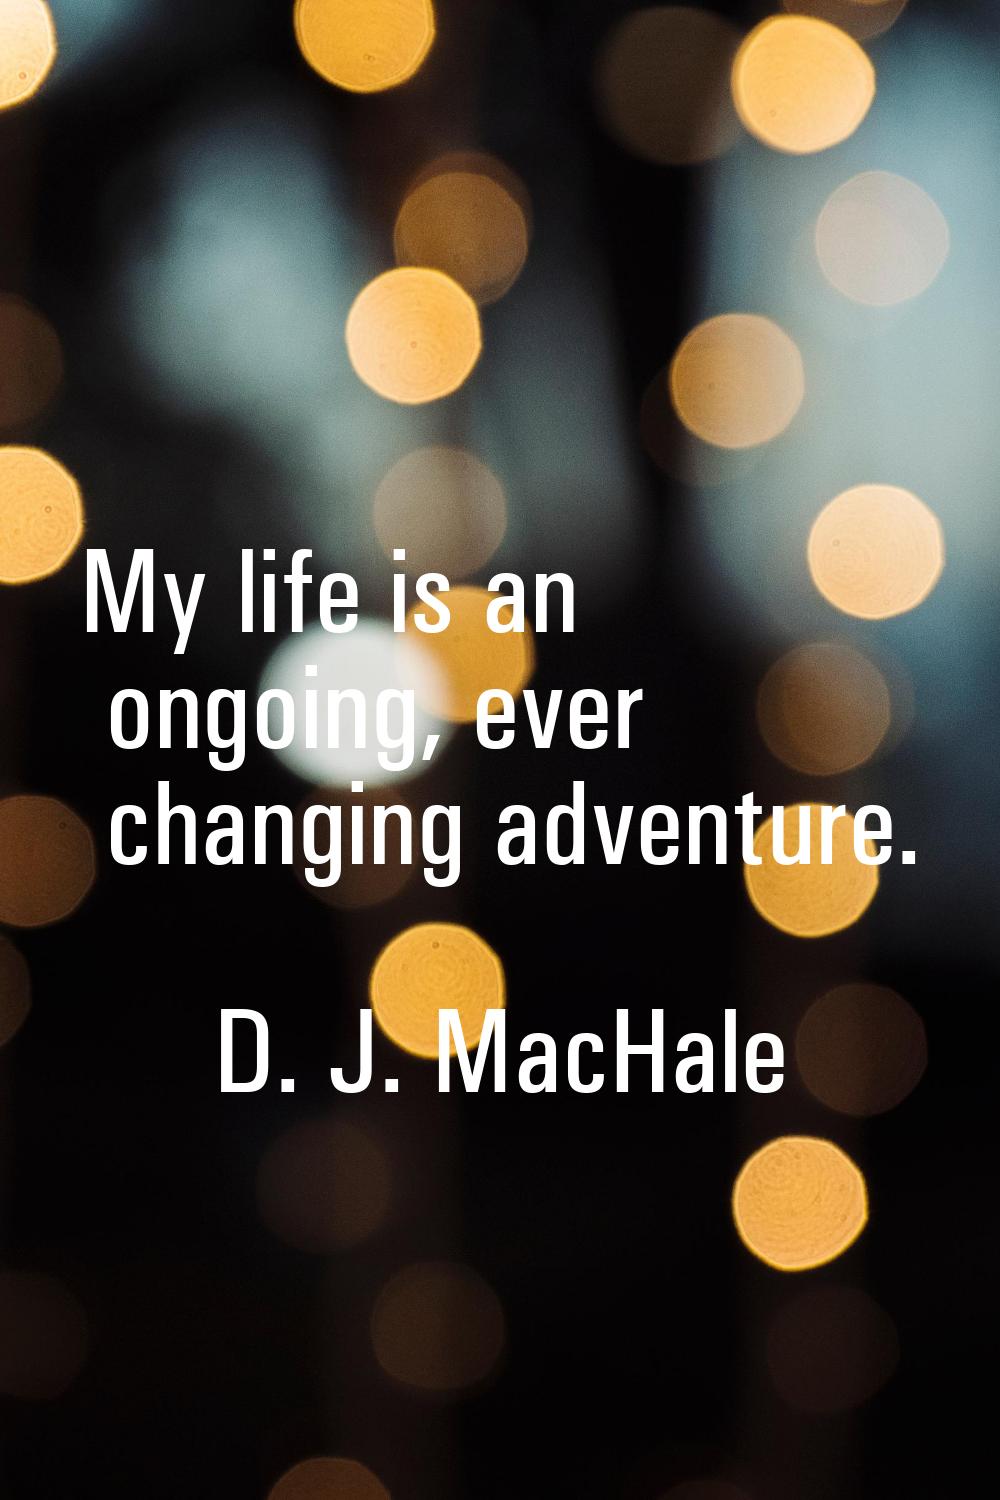 My life is an ongoing, ever changing adventure.